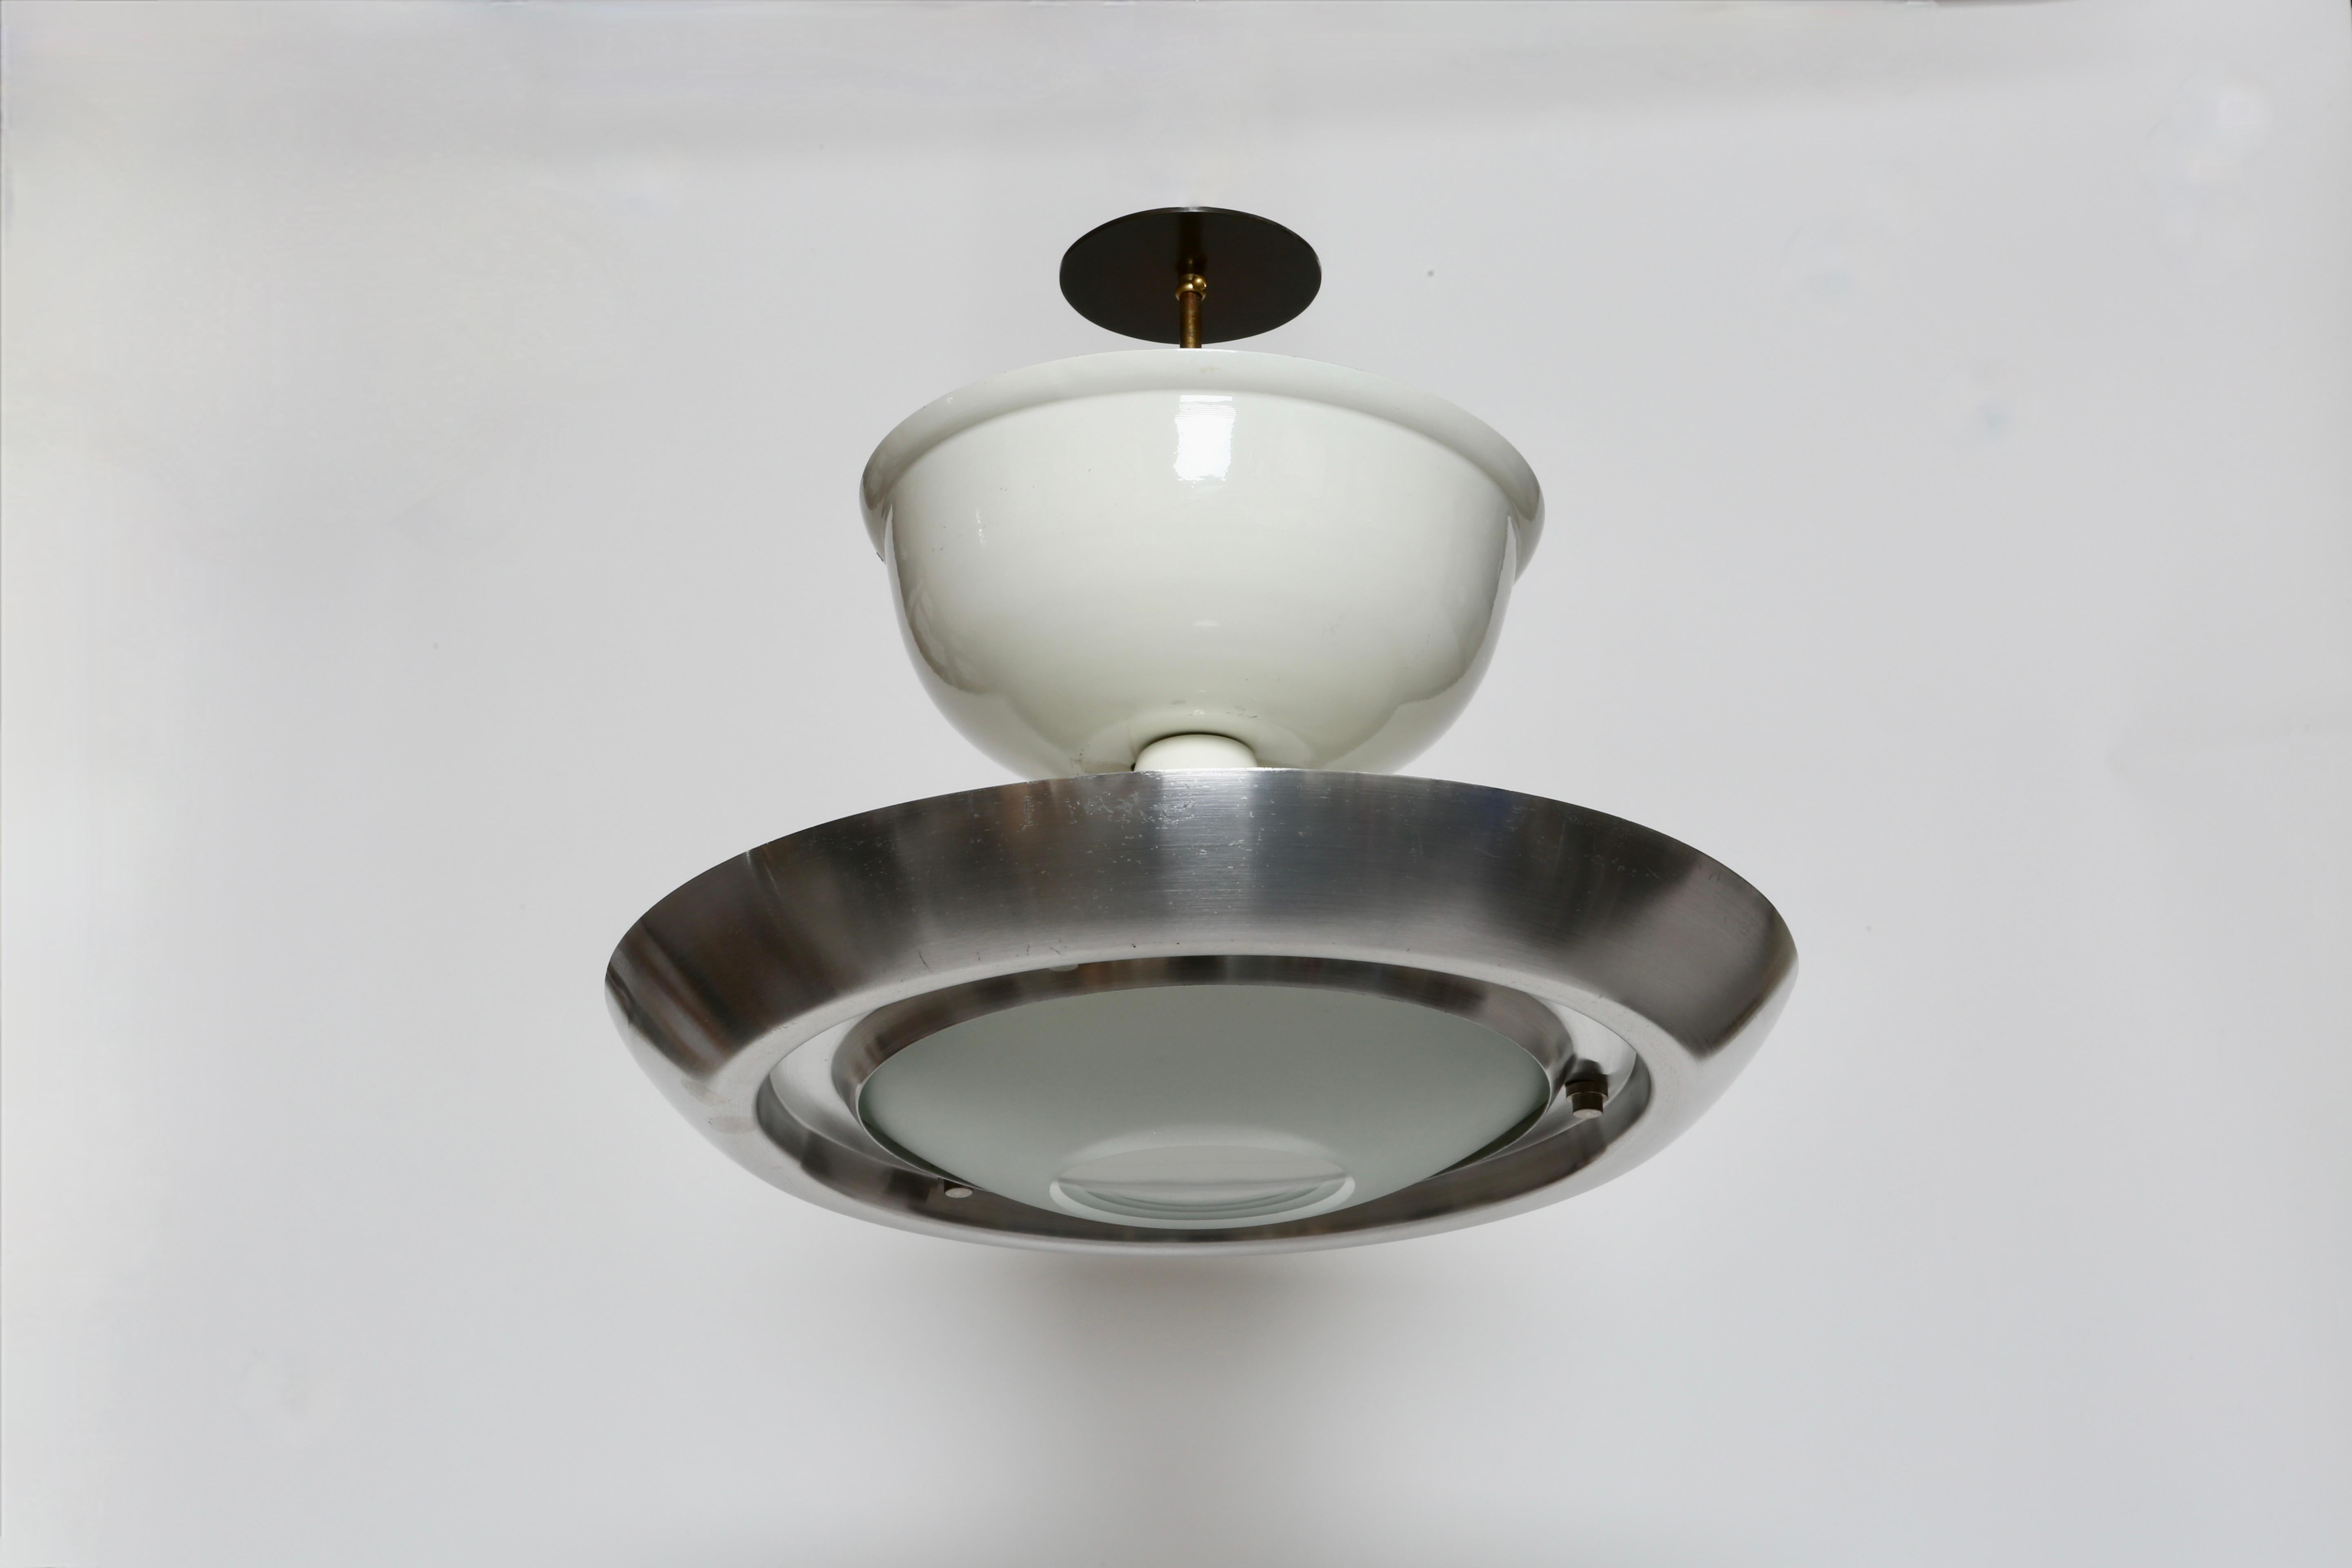 Lumi Milano ceiling suspension
Designed and made in Italy, in 1960s.
Glass, enameled metal, aluminum.
Takes 3 candelabra and 1 medium bulbs.
Complimentary US rewiring upon request
Height adjustable, ceiling rod can be made shorter or longer.
Body of